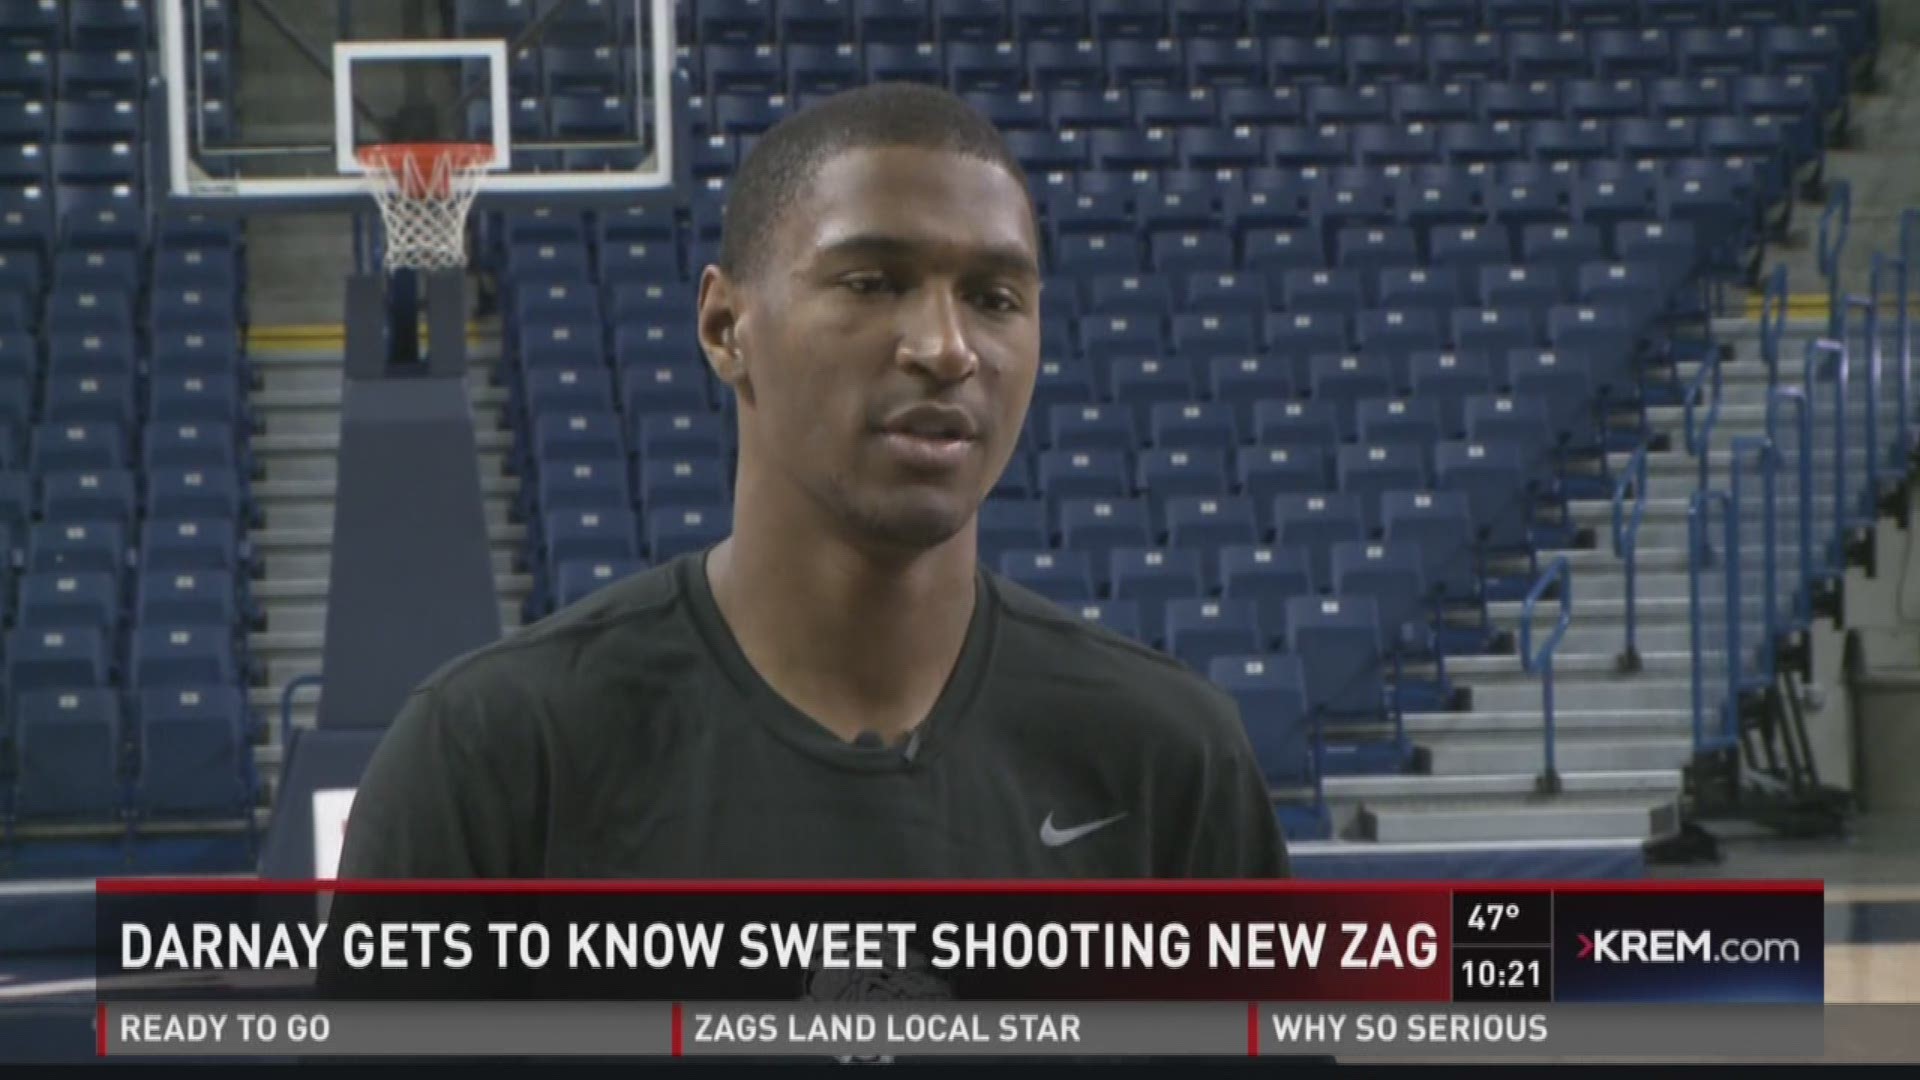 KREM 2 Sports Director Darnay Tripp got to know Cal transfer Jordan Mathews before his first game with the Zags. The two also played a GU spin on a game of HORSE, and it didn't go well for Darnay.